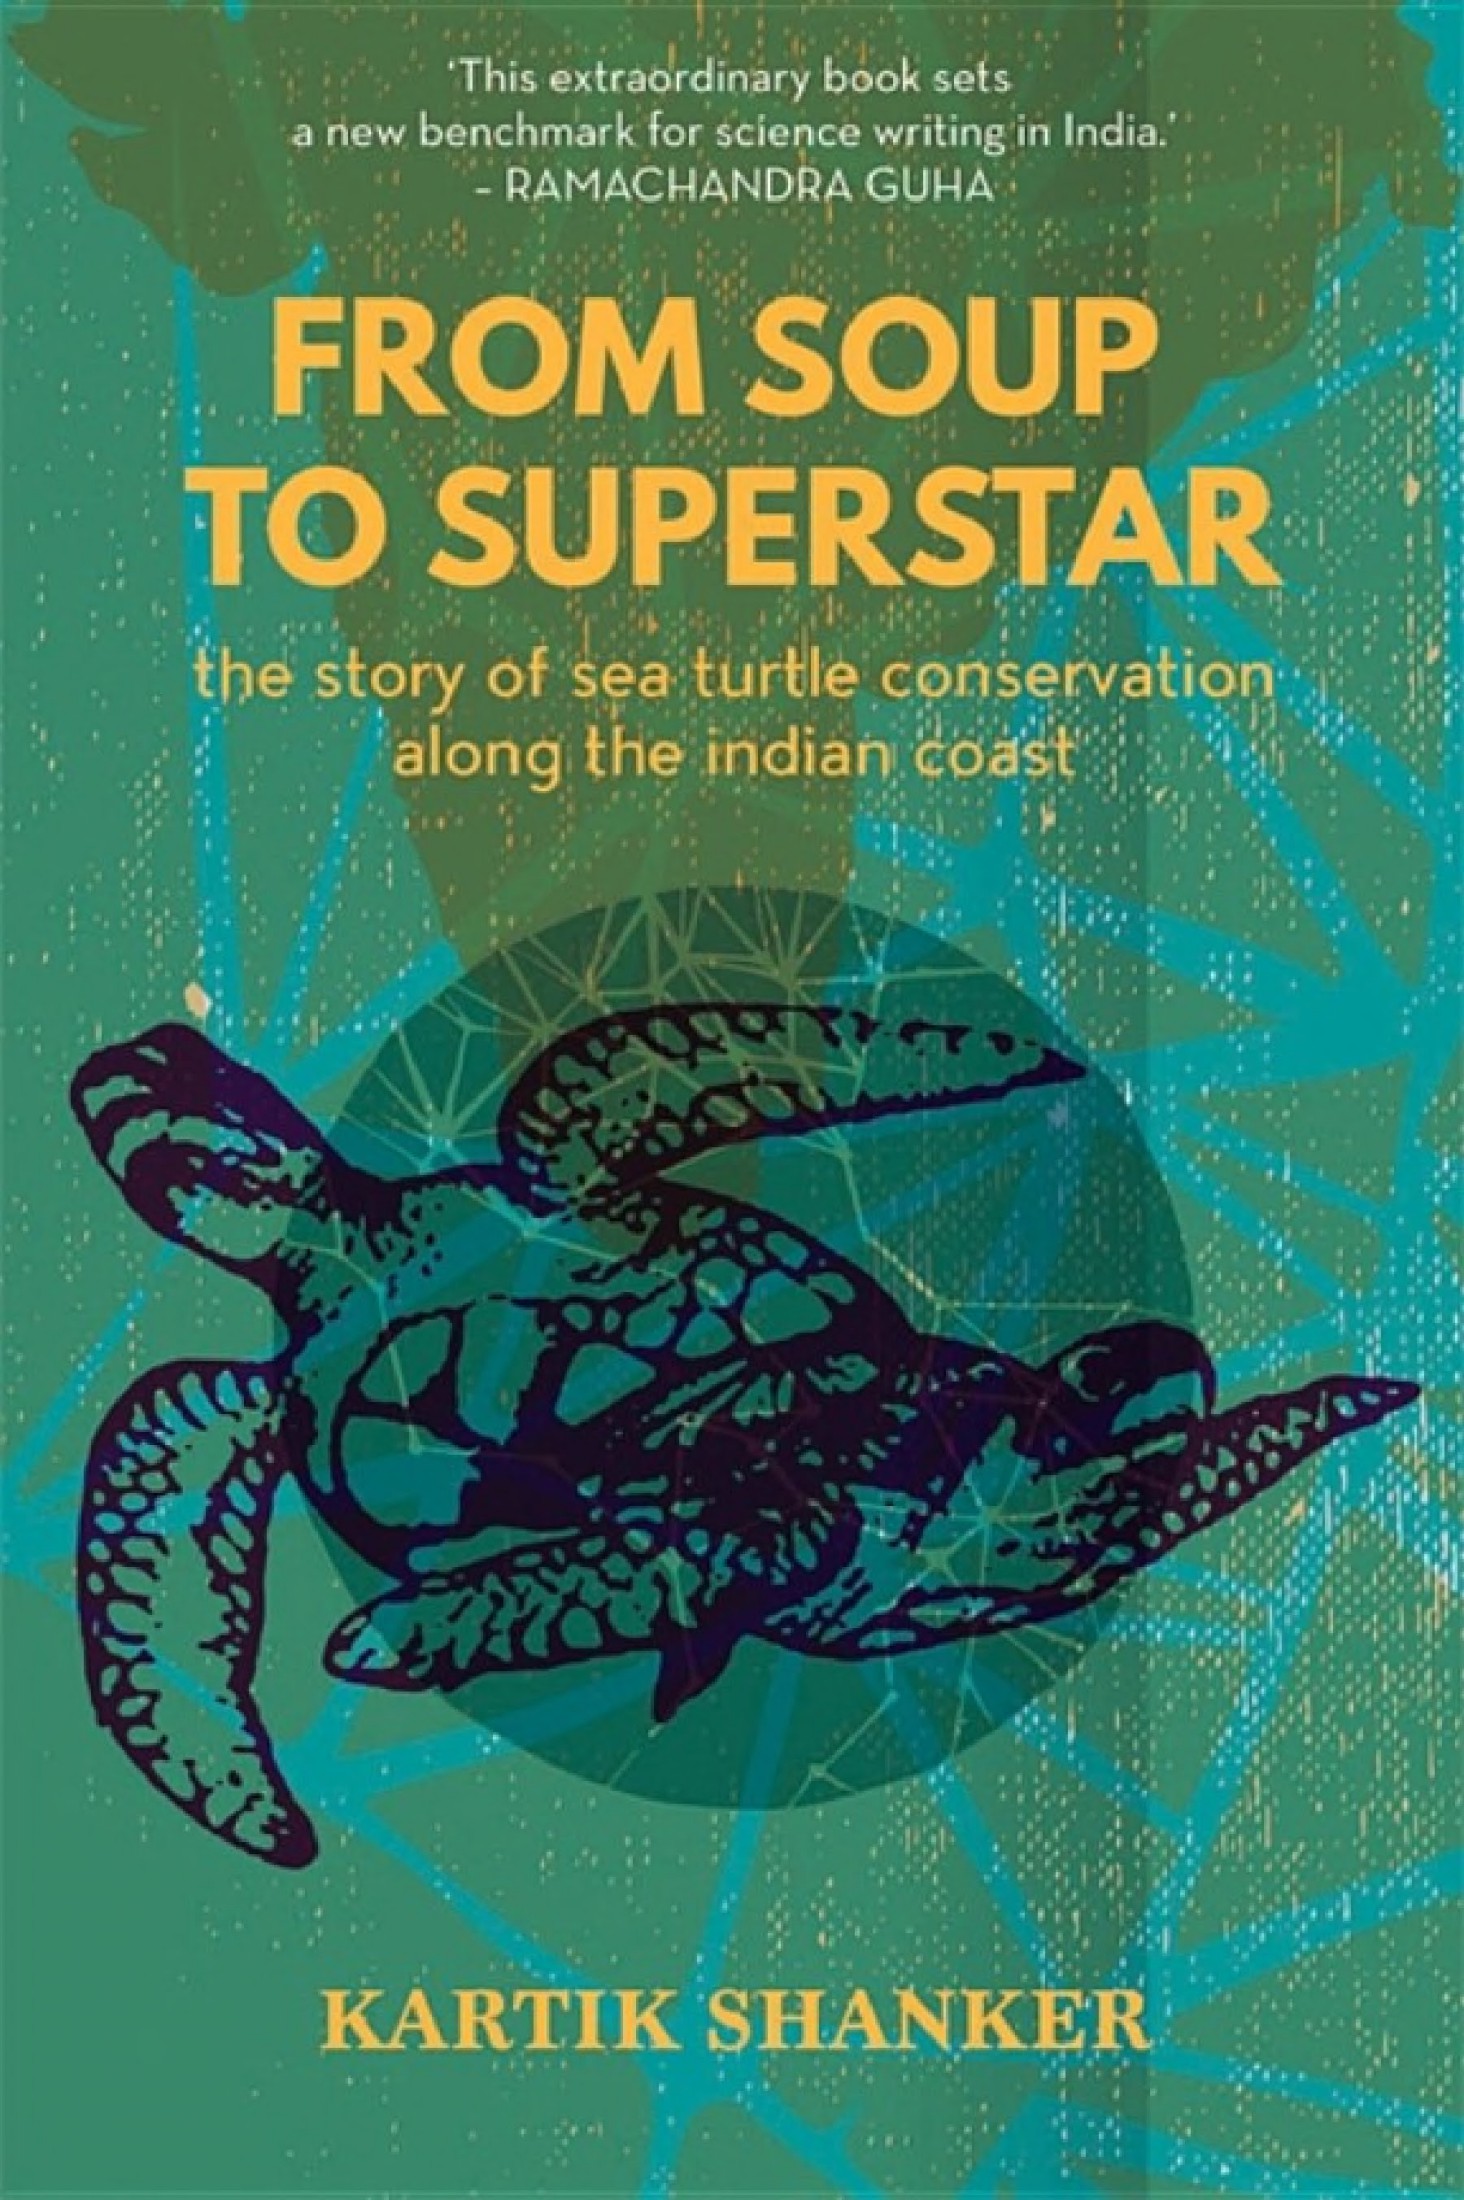 From Soup to Superstar: The Story of Sea Turtle Conservation Along the Indian Coast